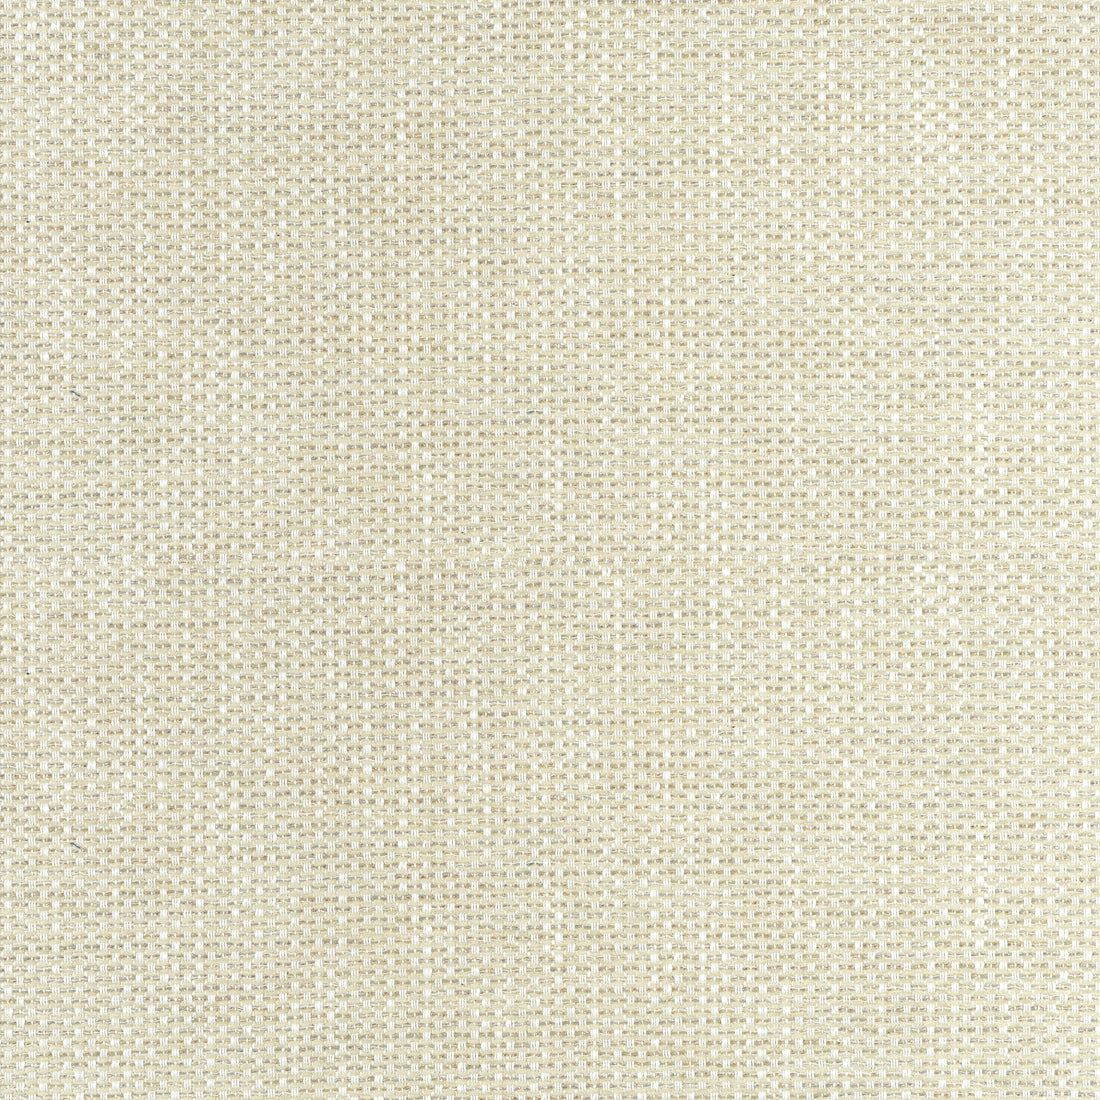 Cascade fabric in oatmeal color - pattern number W75254 - by Thibaut in the Elements collection